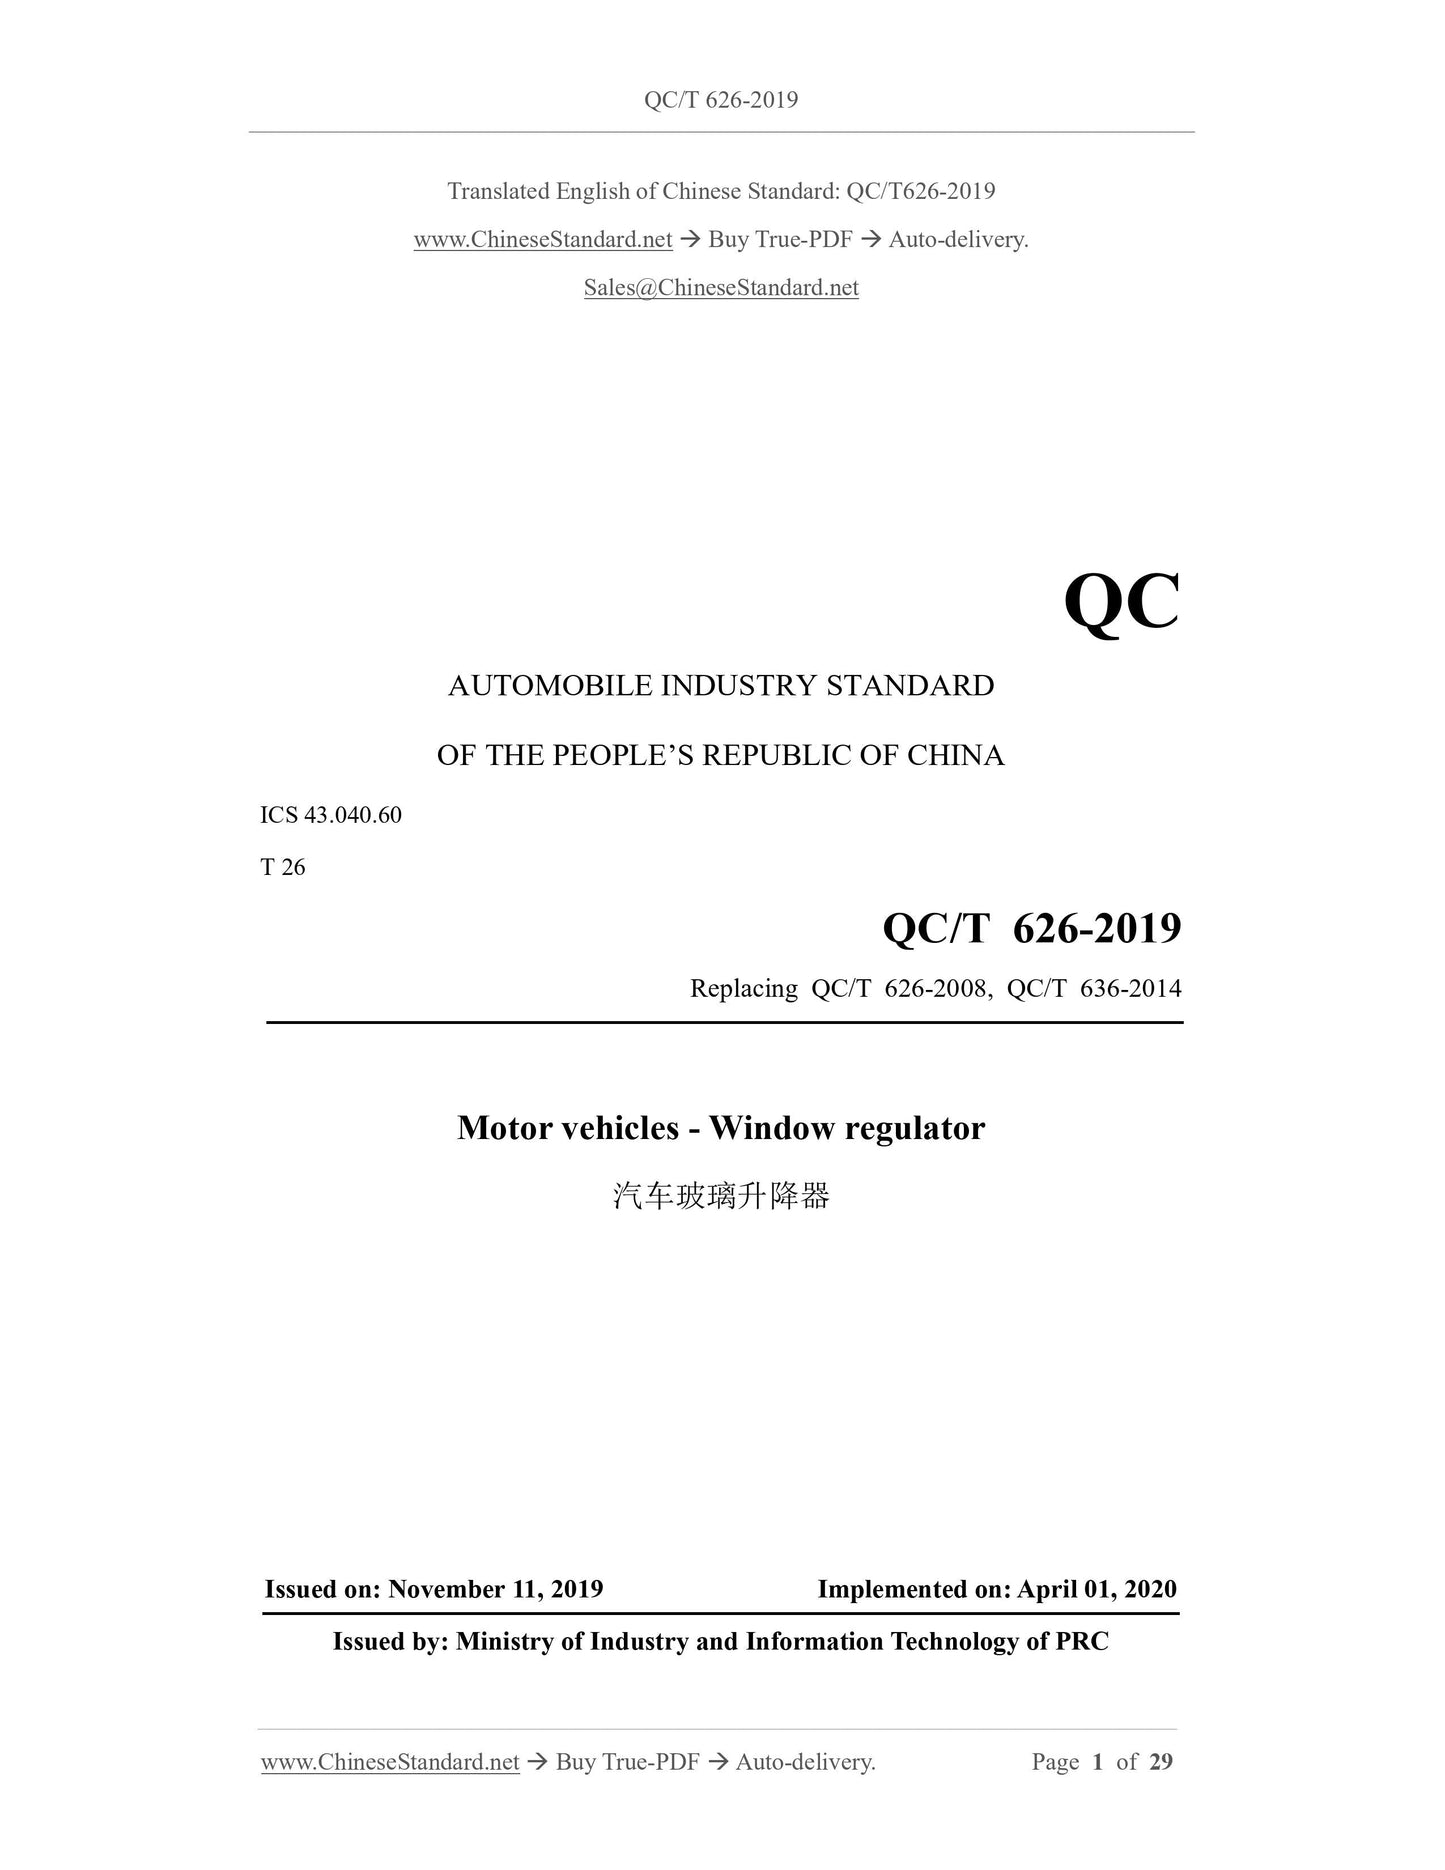 QC/T 626-2019 Page 1